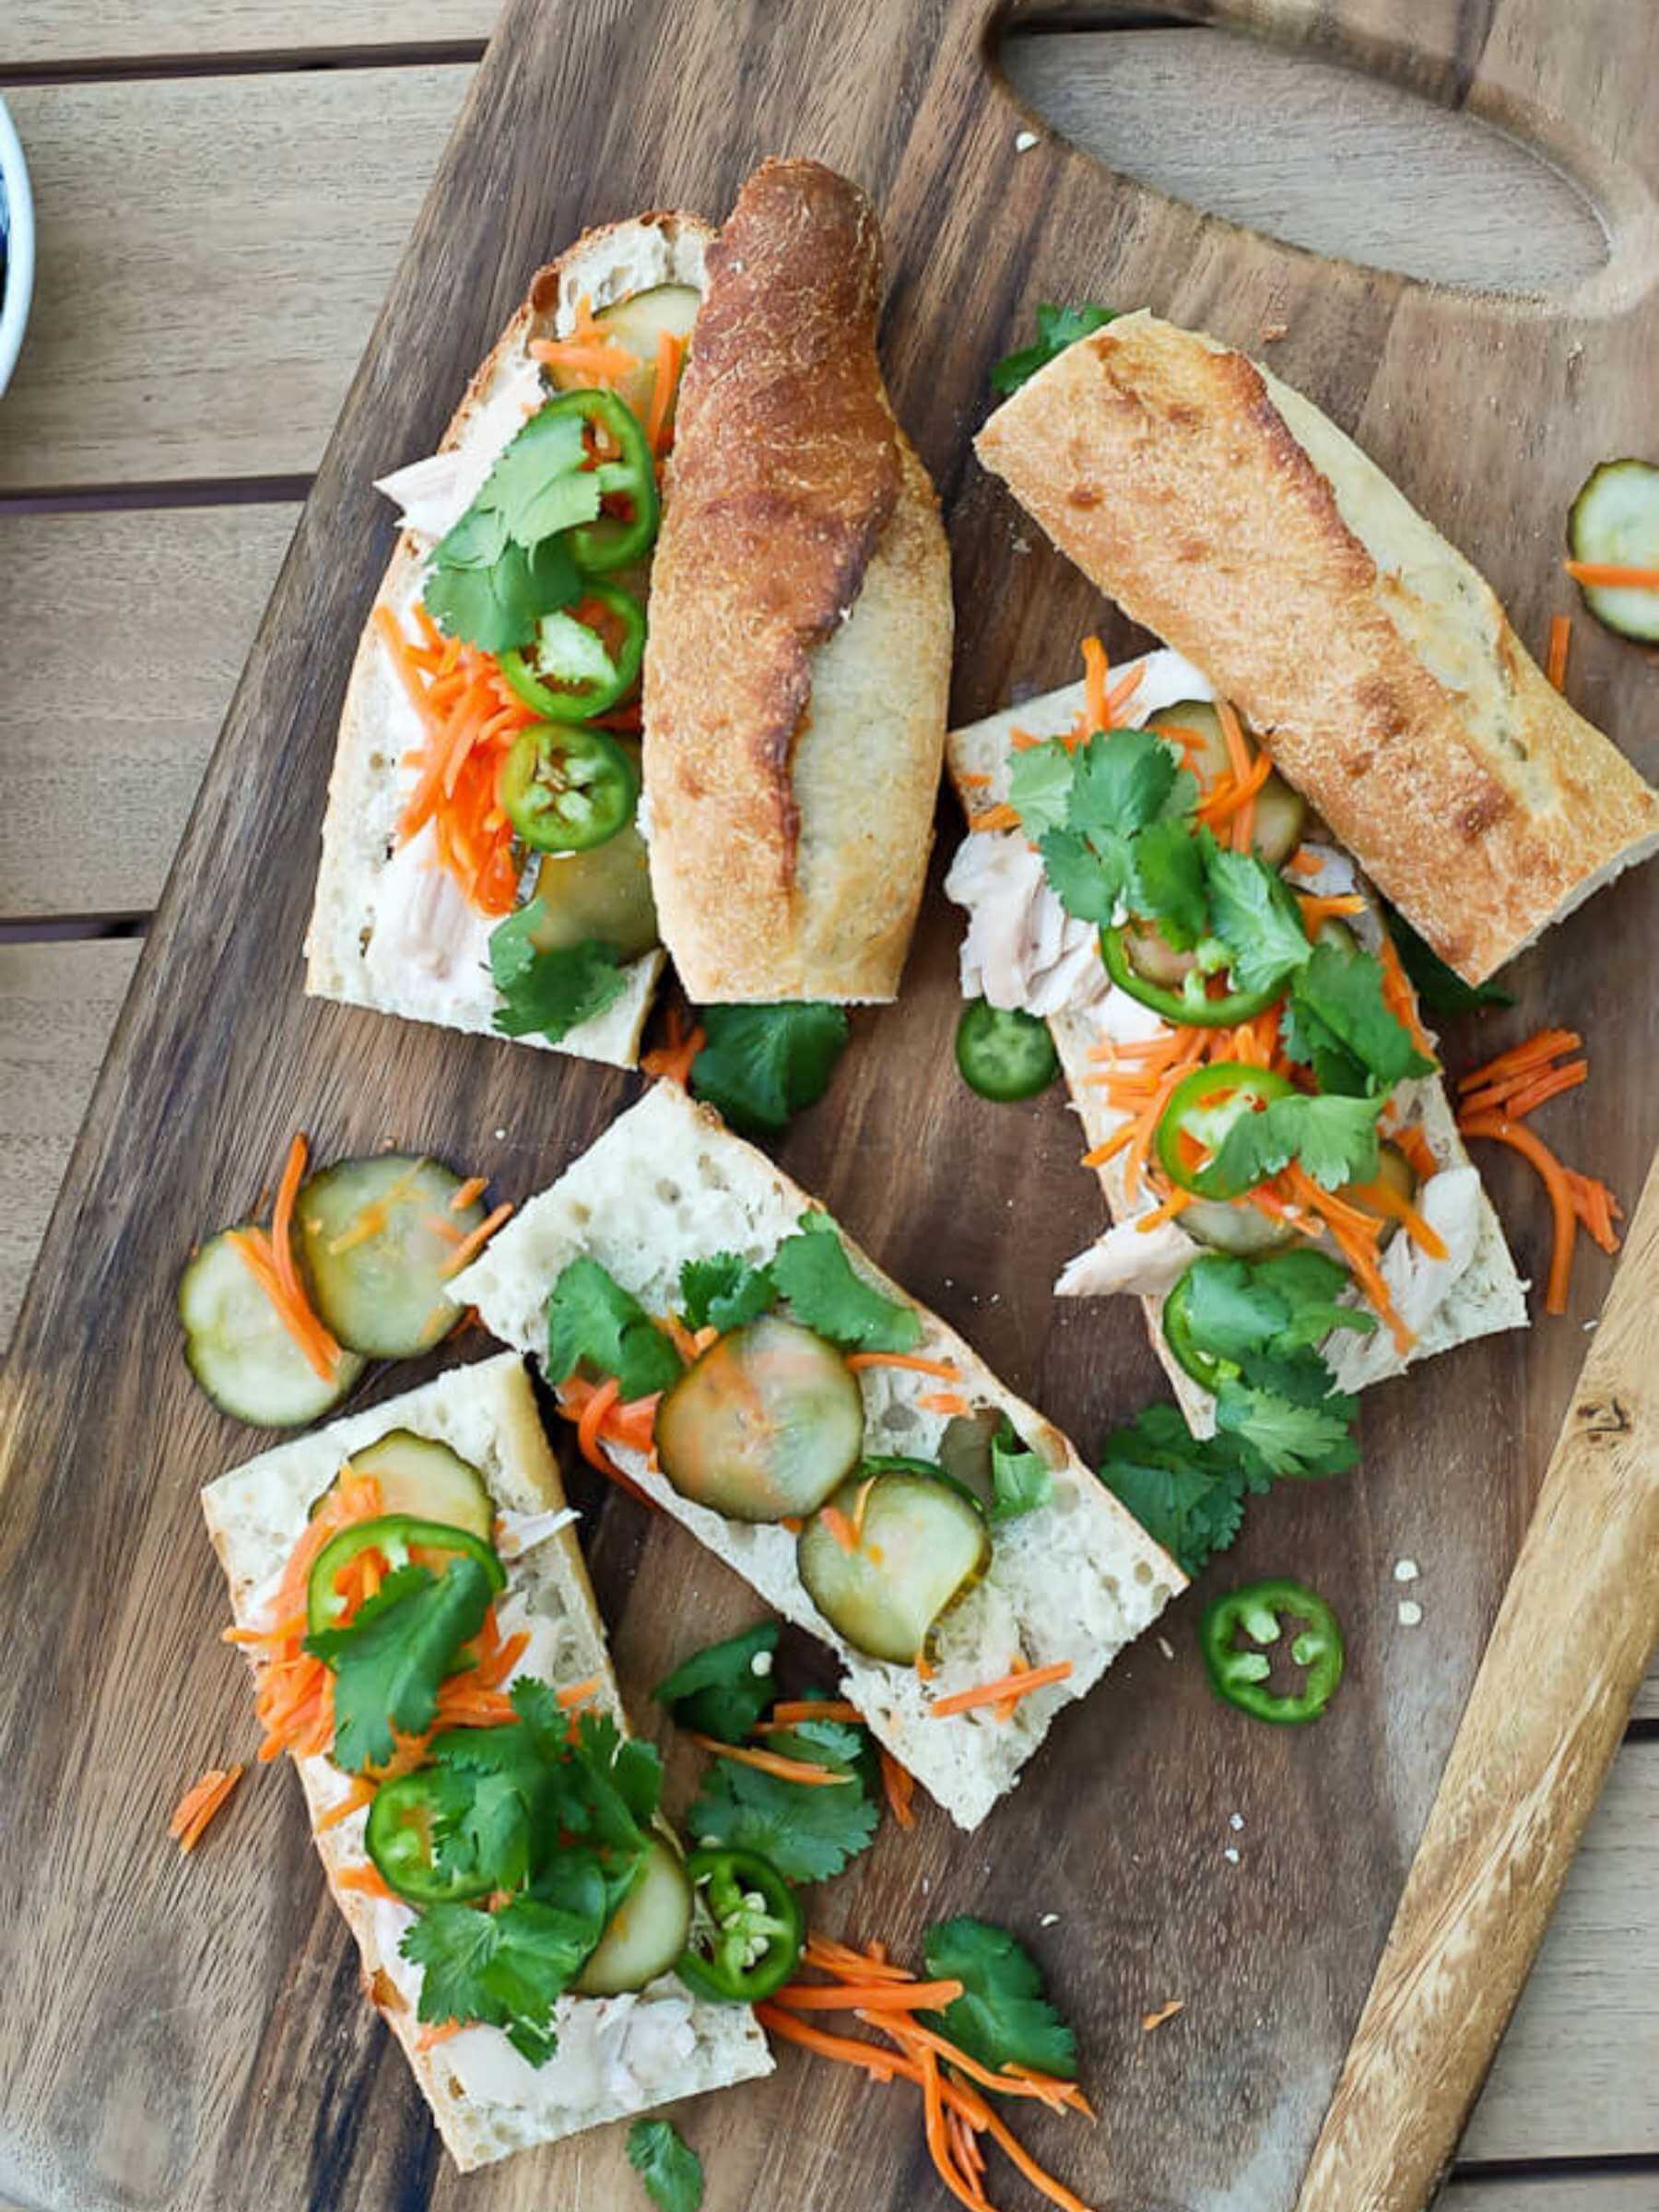 chicken banh mi sandwiches with pickled veggies on cutting board.